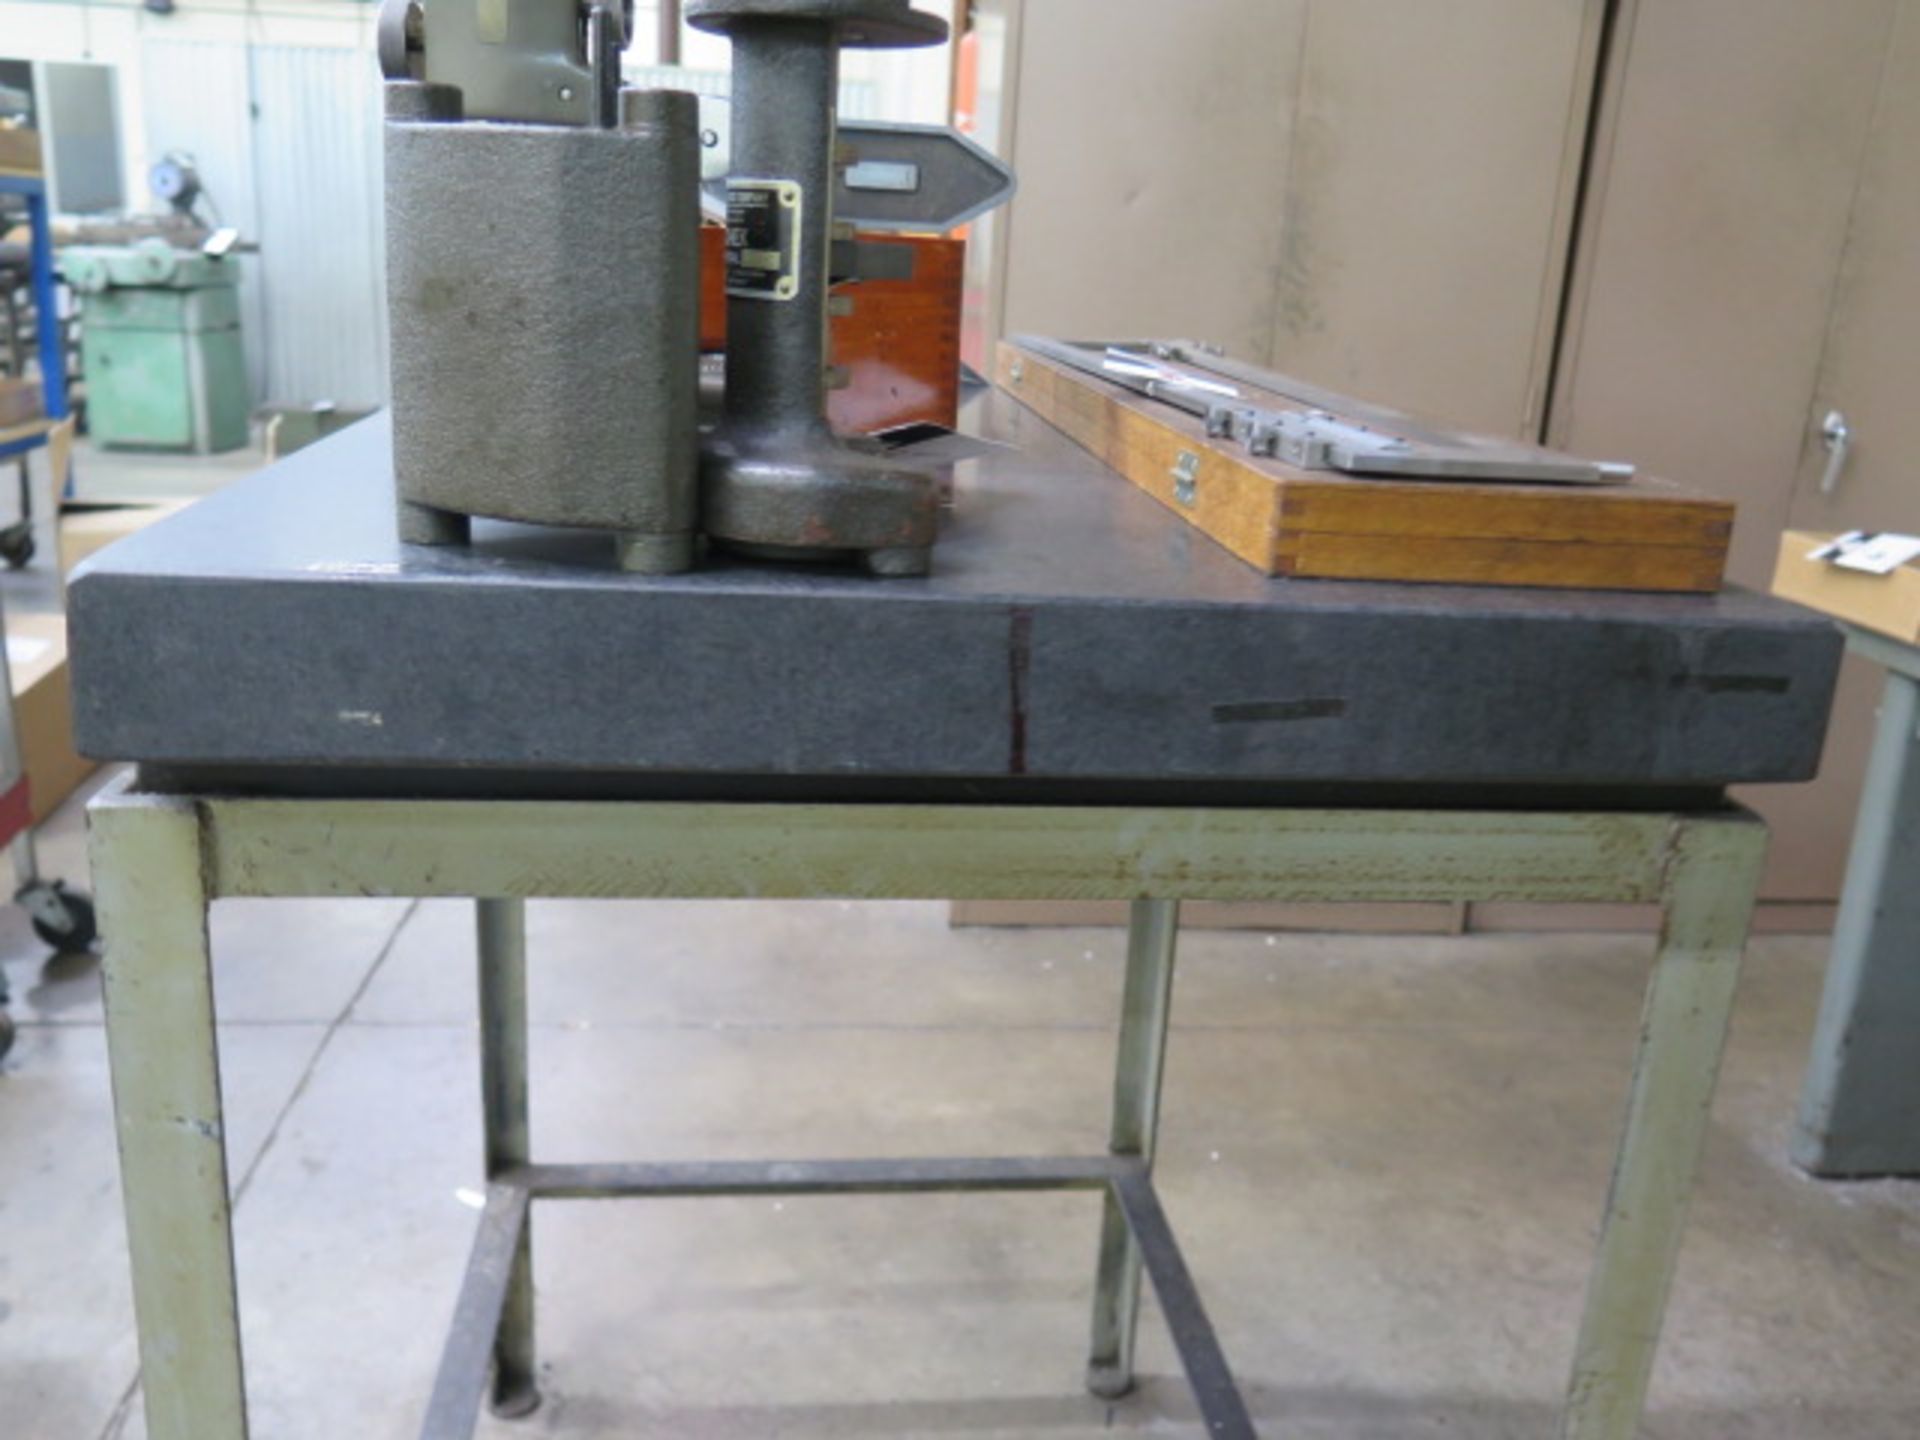 Microflat 24” x 36” x 4 ½” 2-Ledge Granite Surface Plate w/ Stand (SOLD AS-IS - NO WARRANTY) - Image 3 of 6